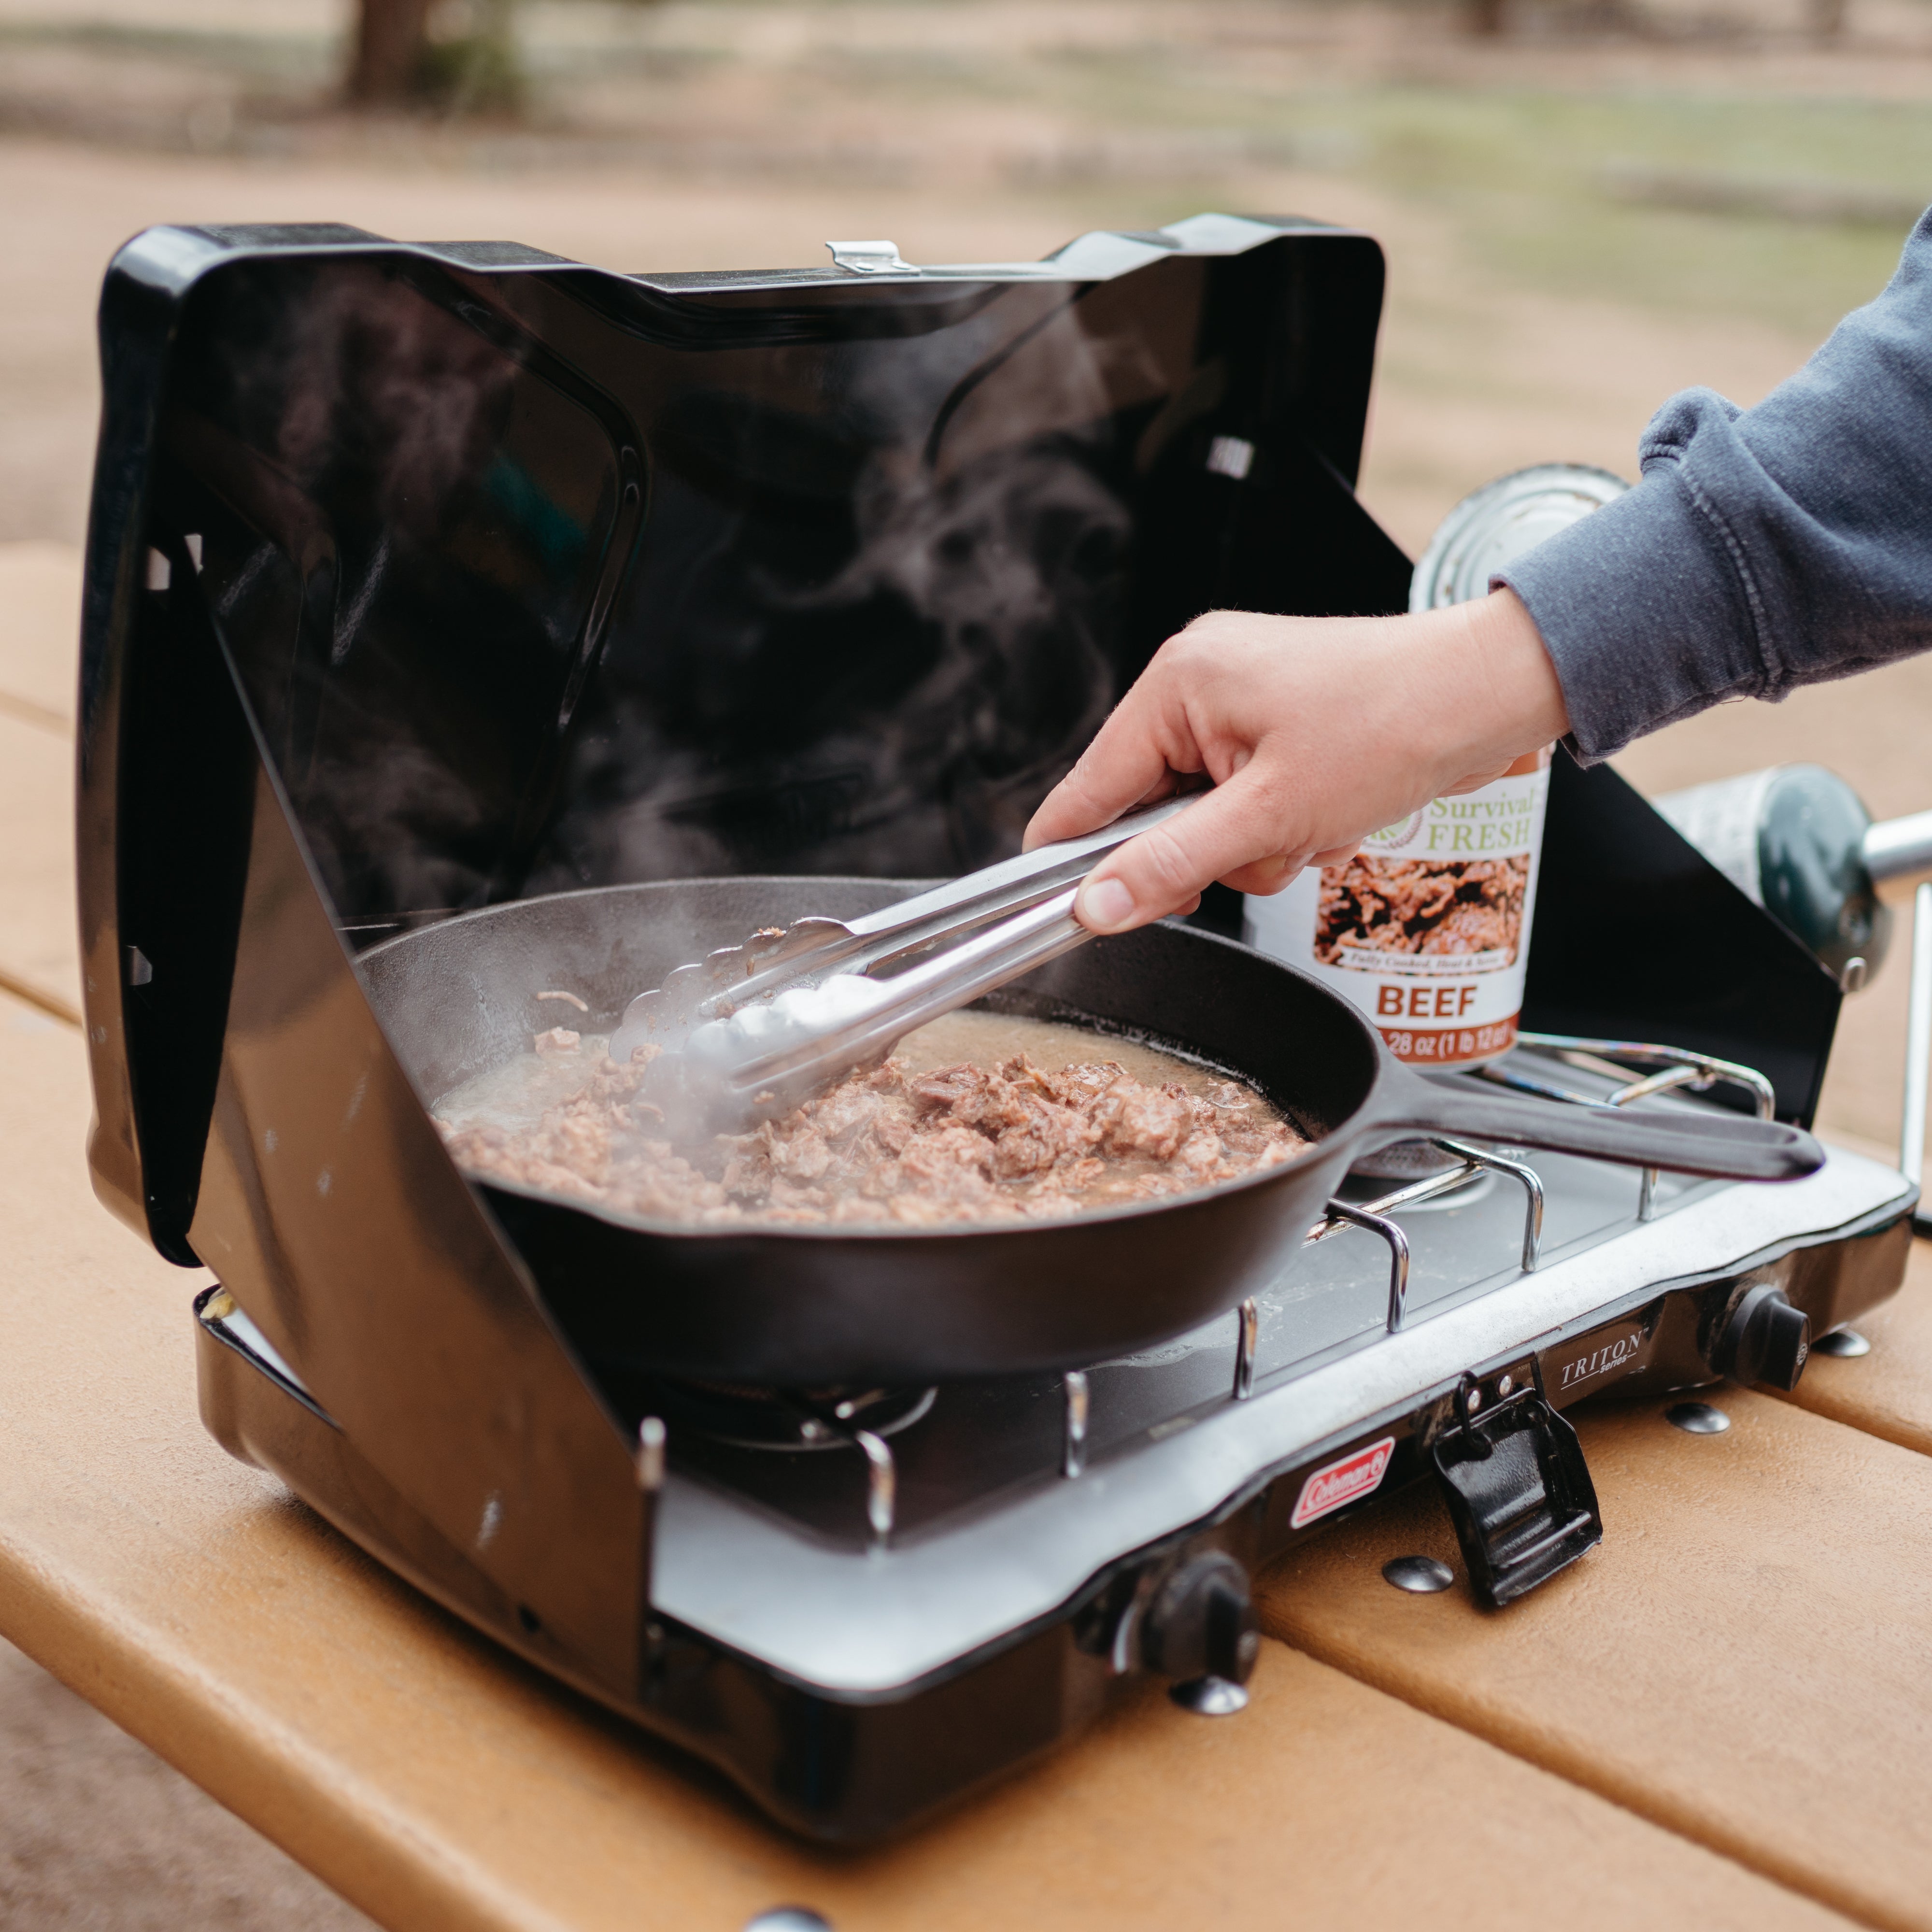 Person cooking beef on a portable gas stove outdoors.